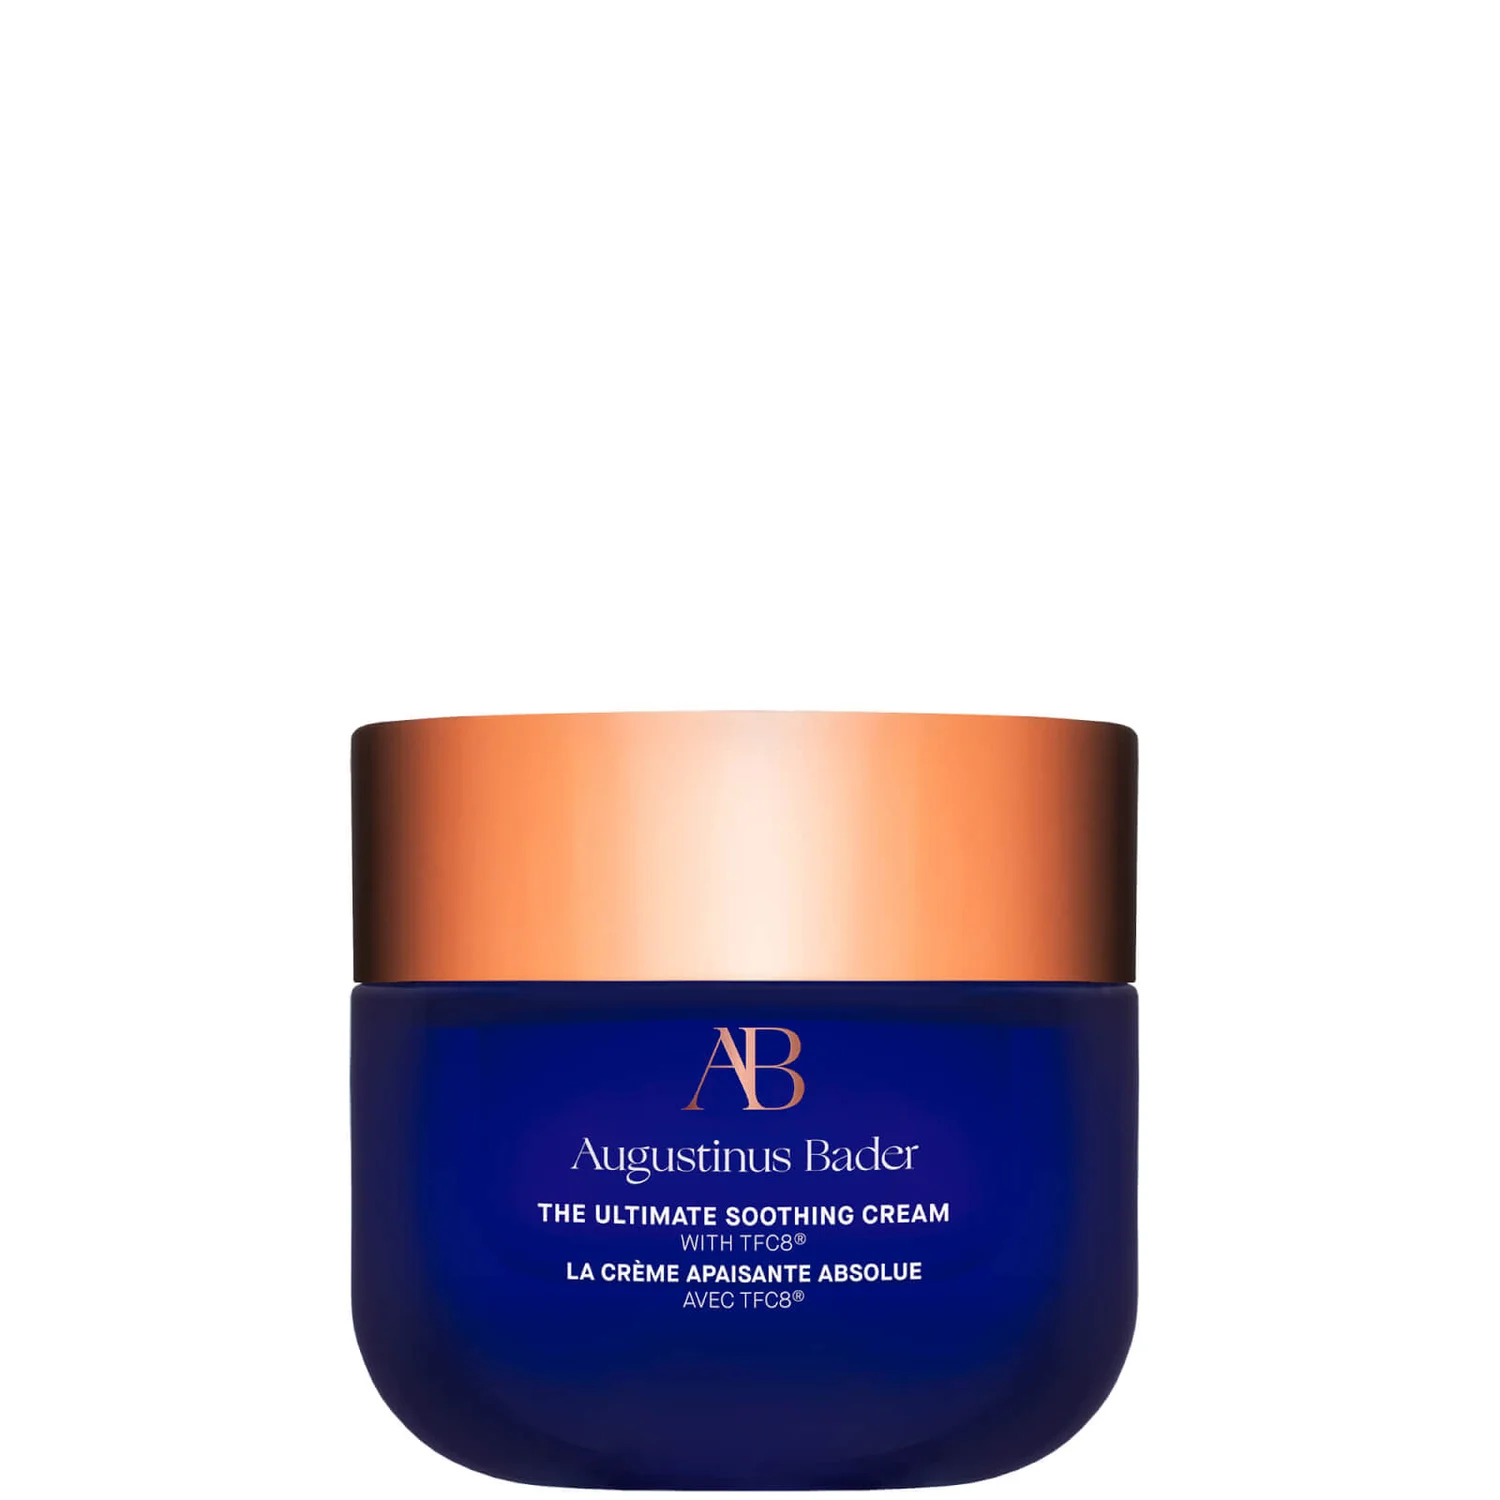 cultbeauty.co.uk | Augustinus Bader The Ultimate Soothing Cream 50ml